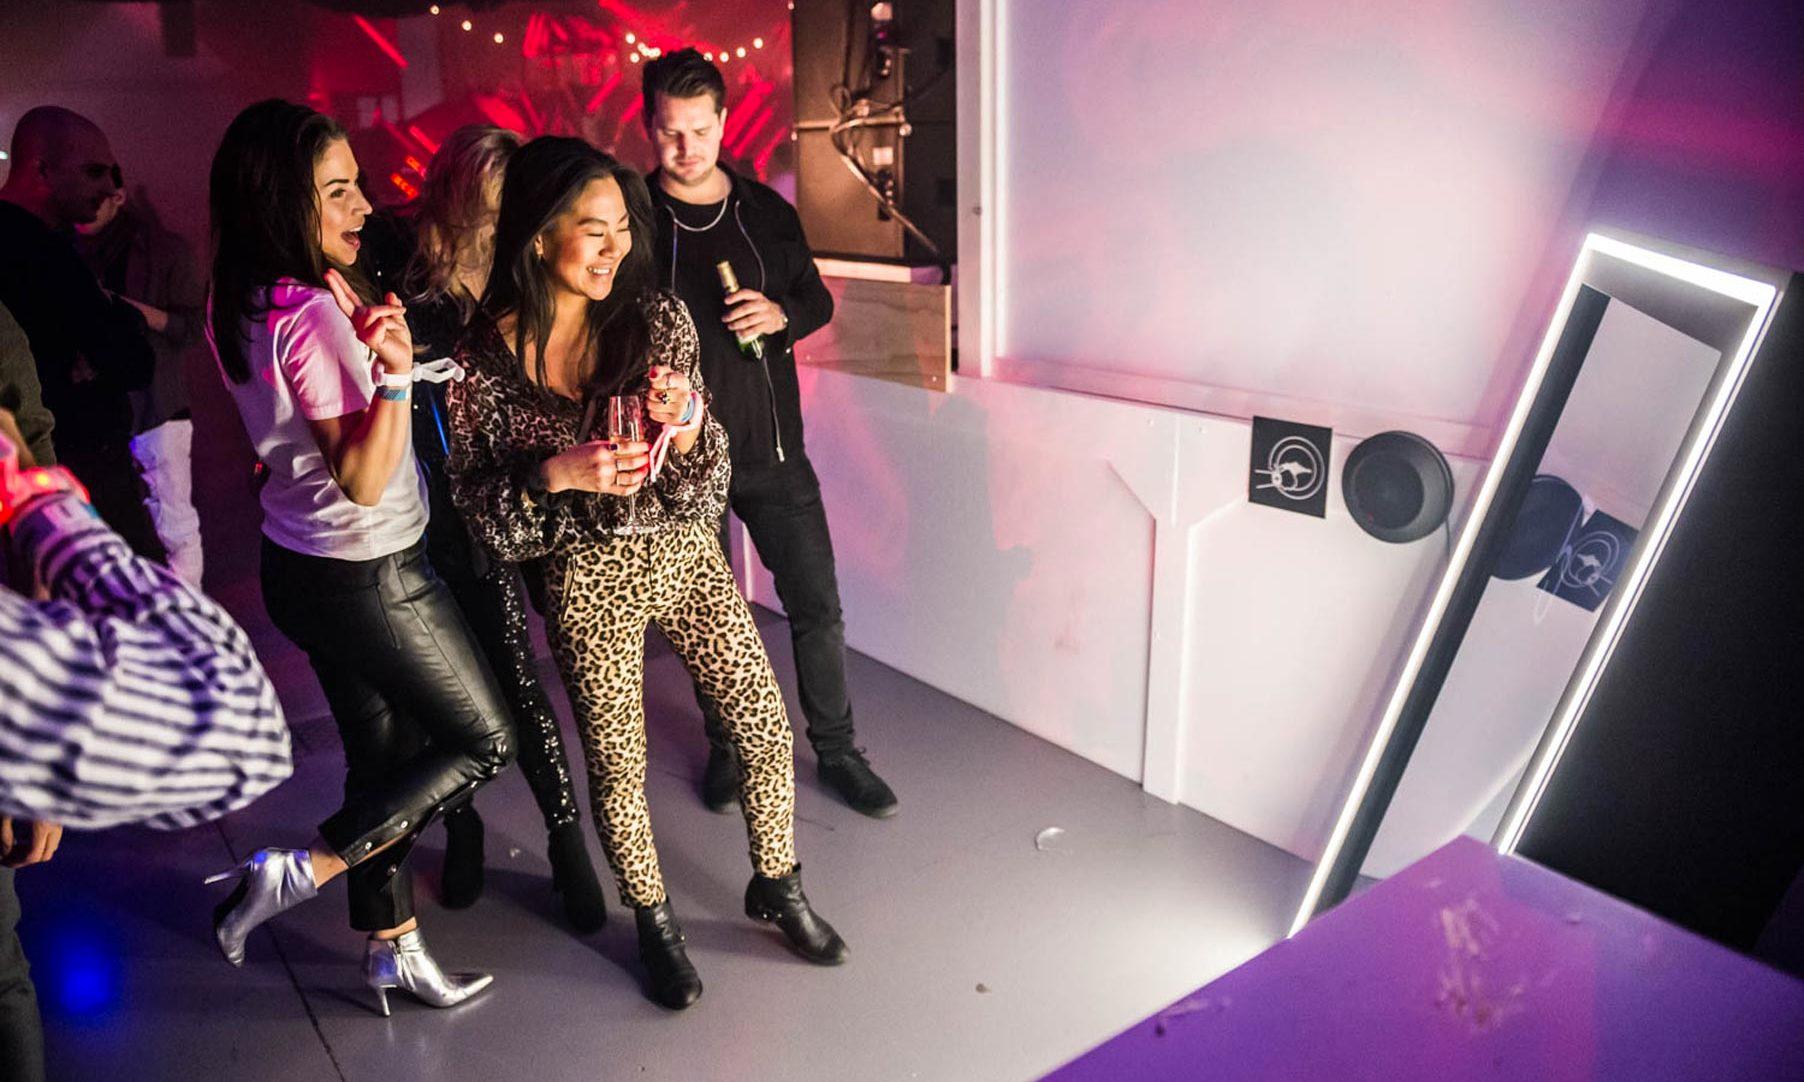 Partygoers take pictures in a mirror photo booth lined with bright white LED lights.